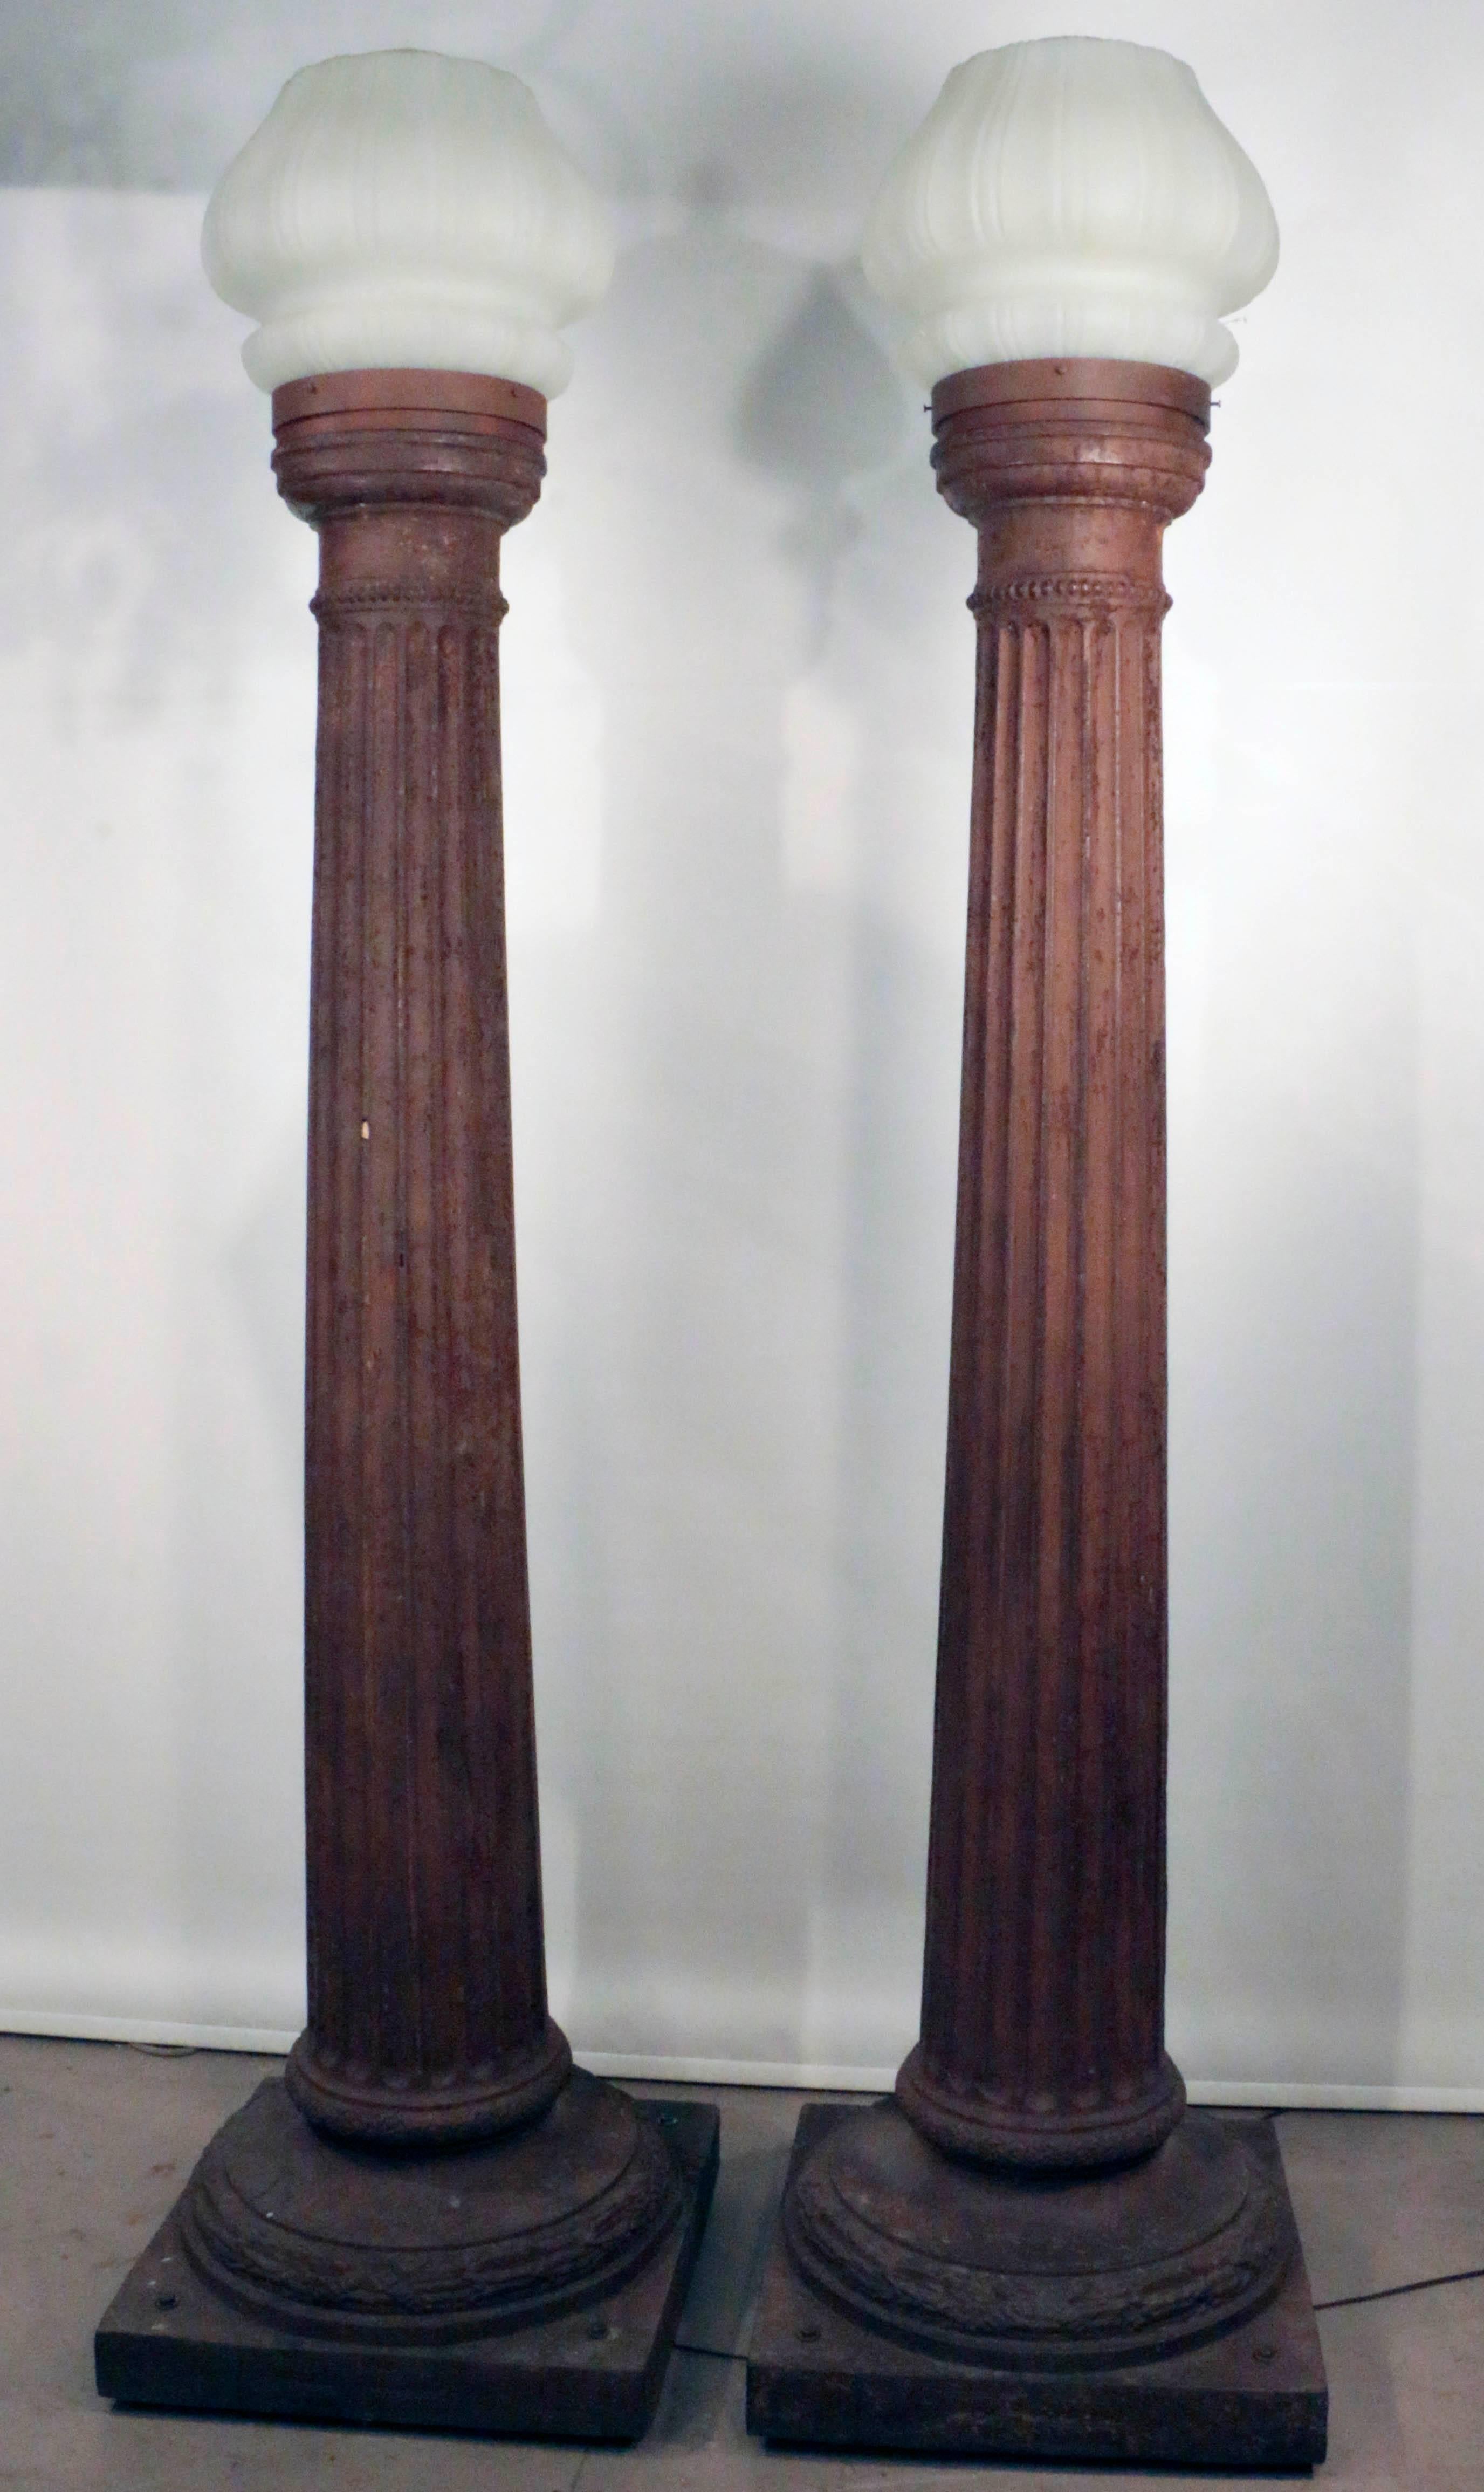 A pair of imposing antique cast iron columns mounted as street lamps. Each Doric pillar fluted and tapering from the square base to a slender top, each now mounted with an antique frosted glass shade in the form of an inverted urn

The base of these